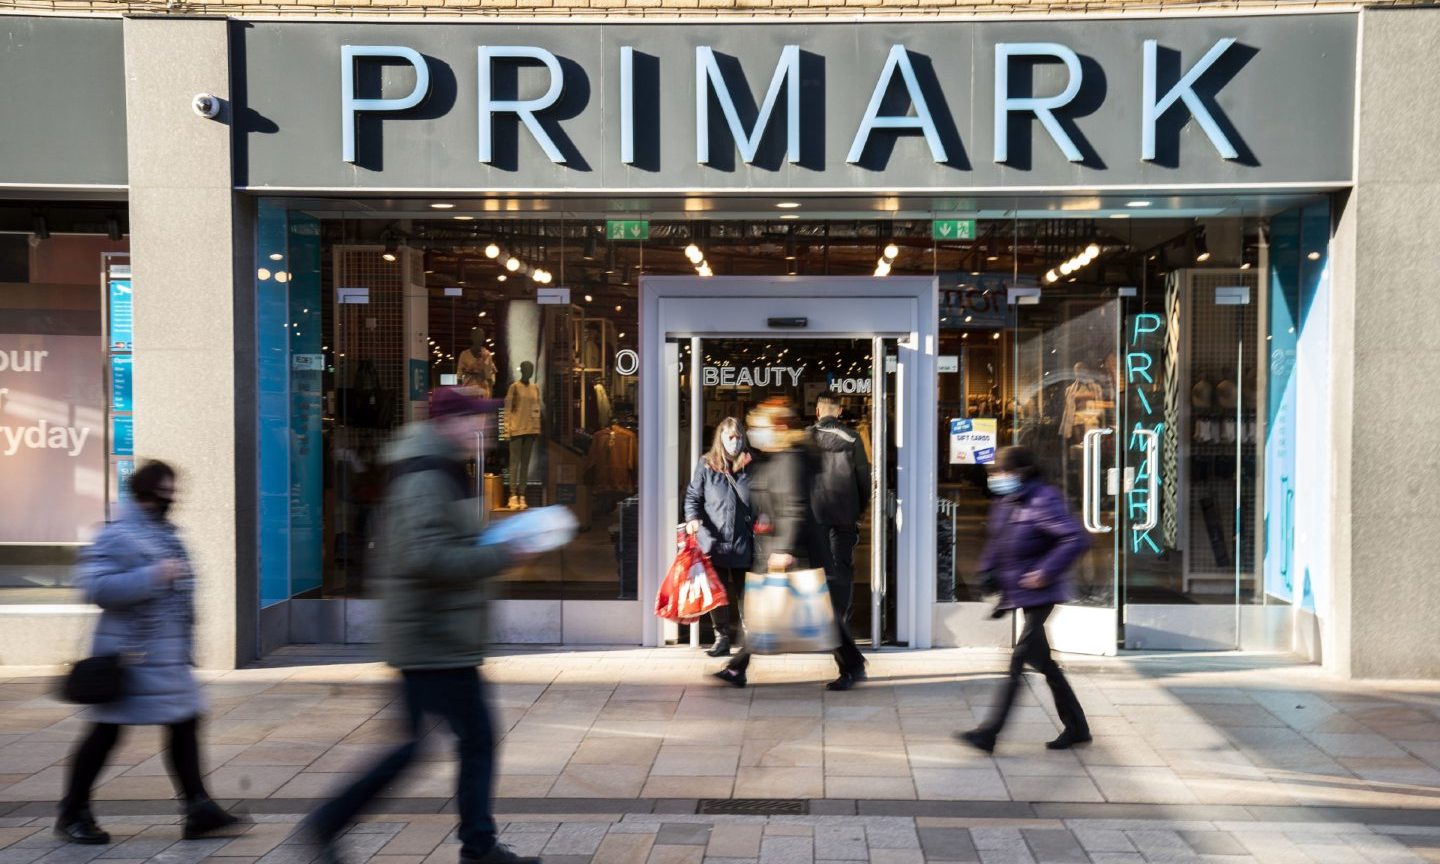 Primark has denied it is moving to the Kingdom Shopping Centre in Glenrothes